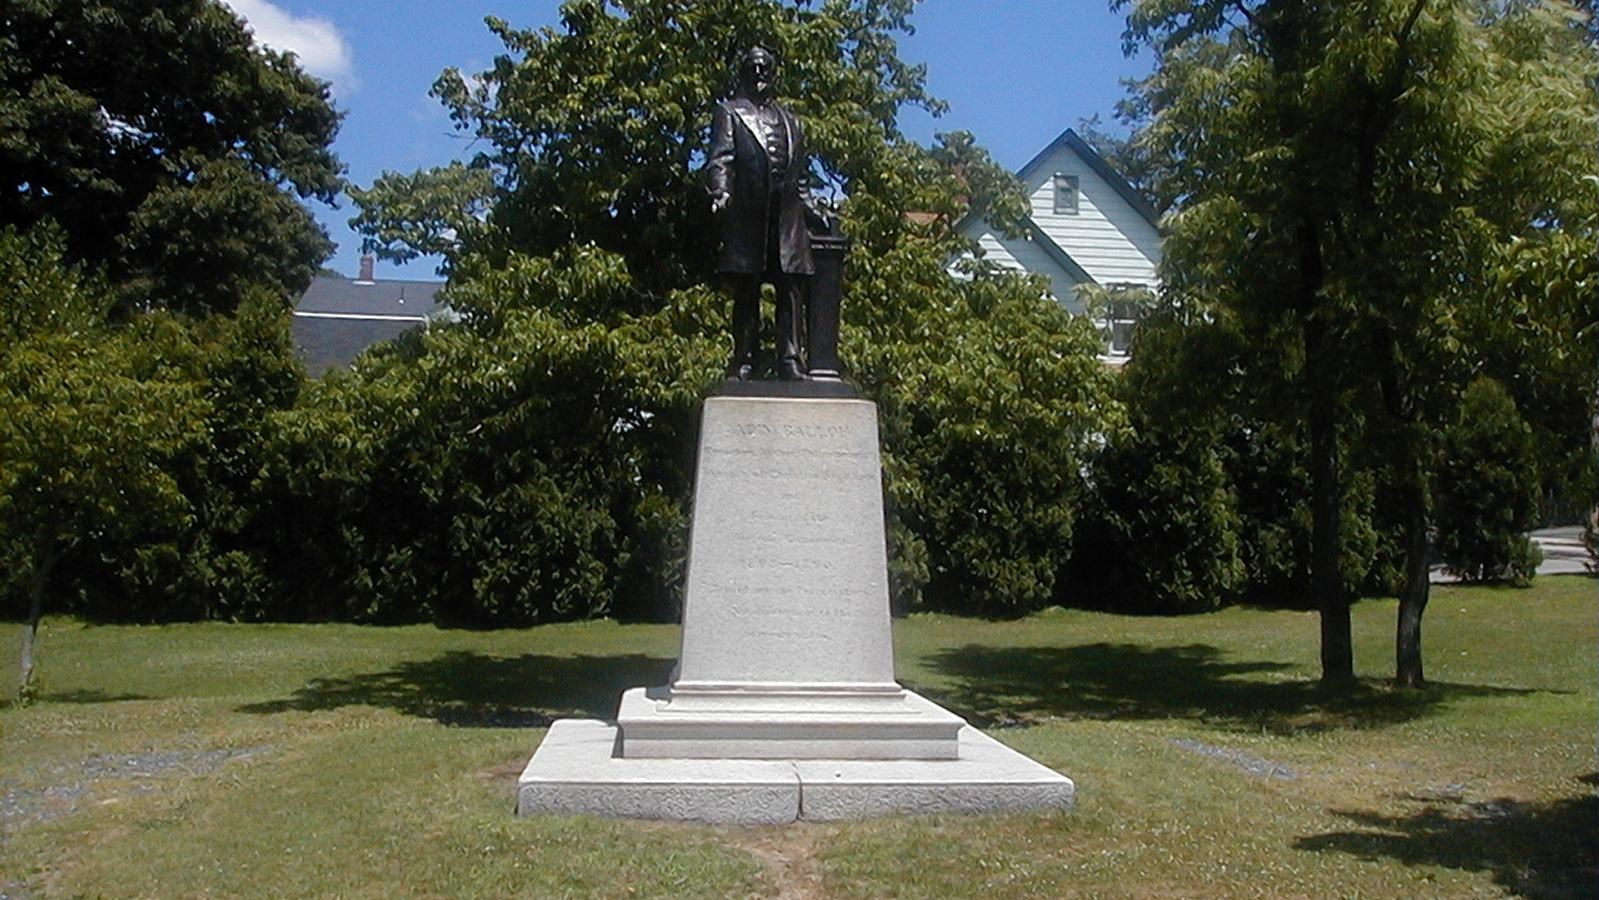 Statue of Adin Ballou sits on a pedestal in a grassy area surrounded by trees